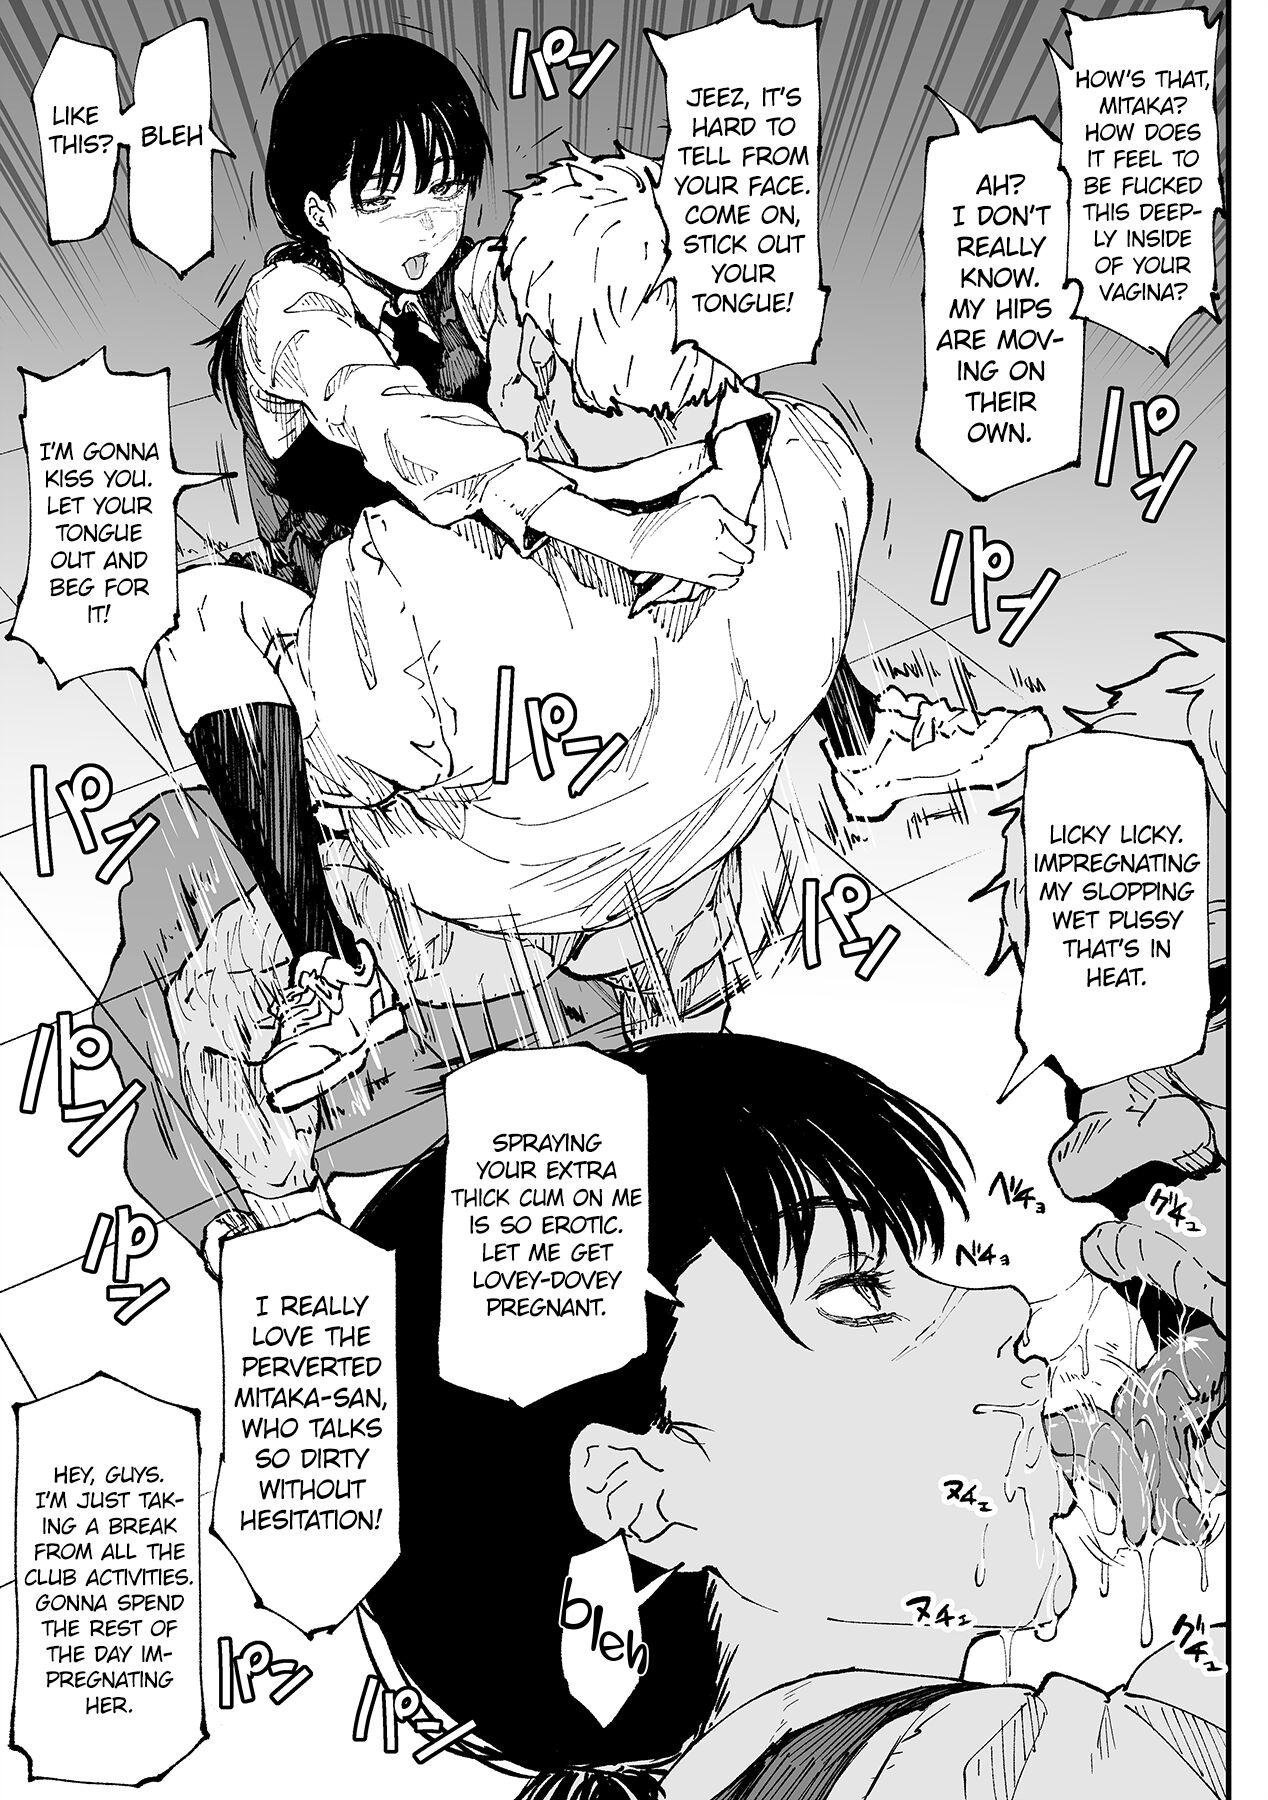 Throat Mitaka-san Does Her Best to Make you Hers - Chainsaw man Hot Chicks Fucking - Page 4